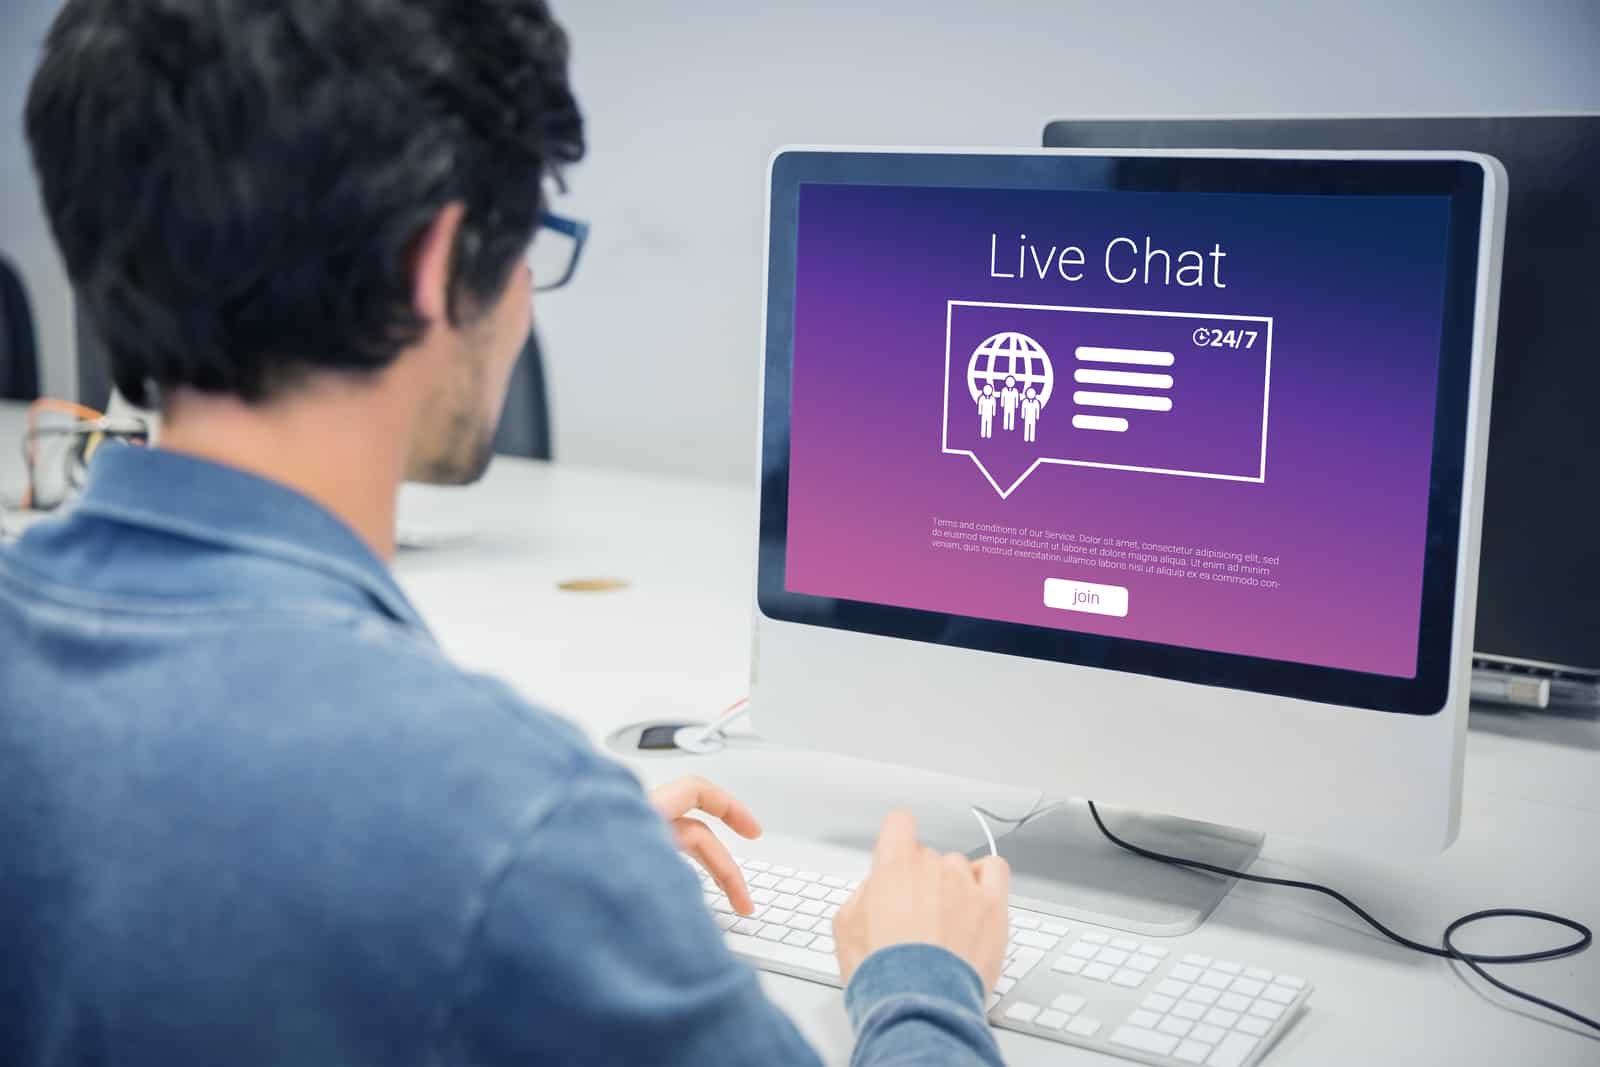 Benefits Of Having A Live Chat On Your Website - Pros And Cons Of Having A Live Chat On Your Website